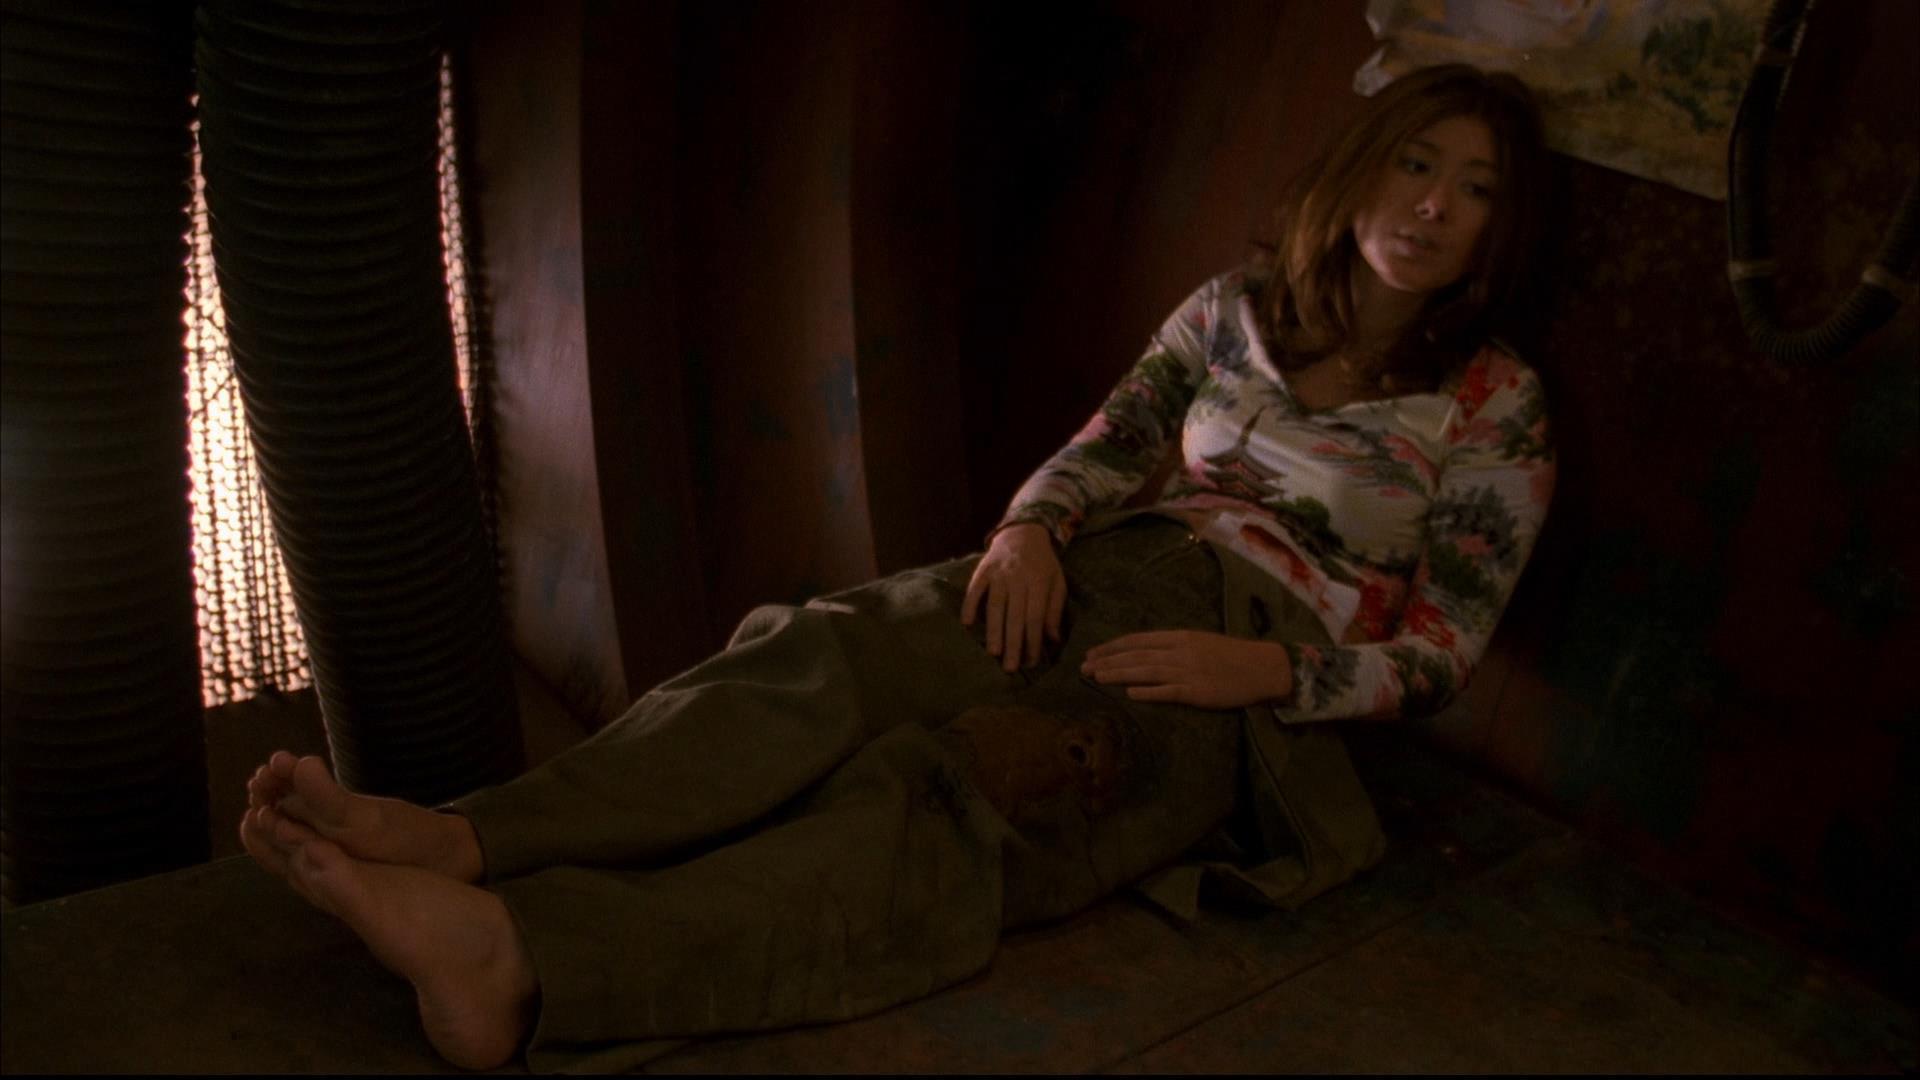 People who liked Jewel Staite's feet, also liked.